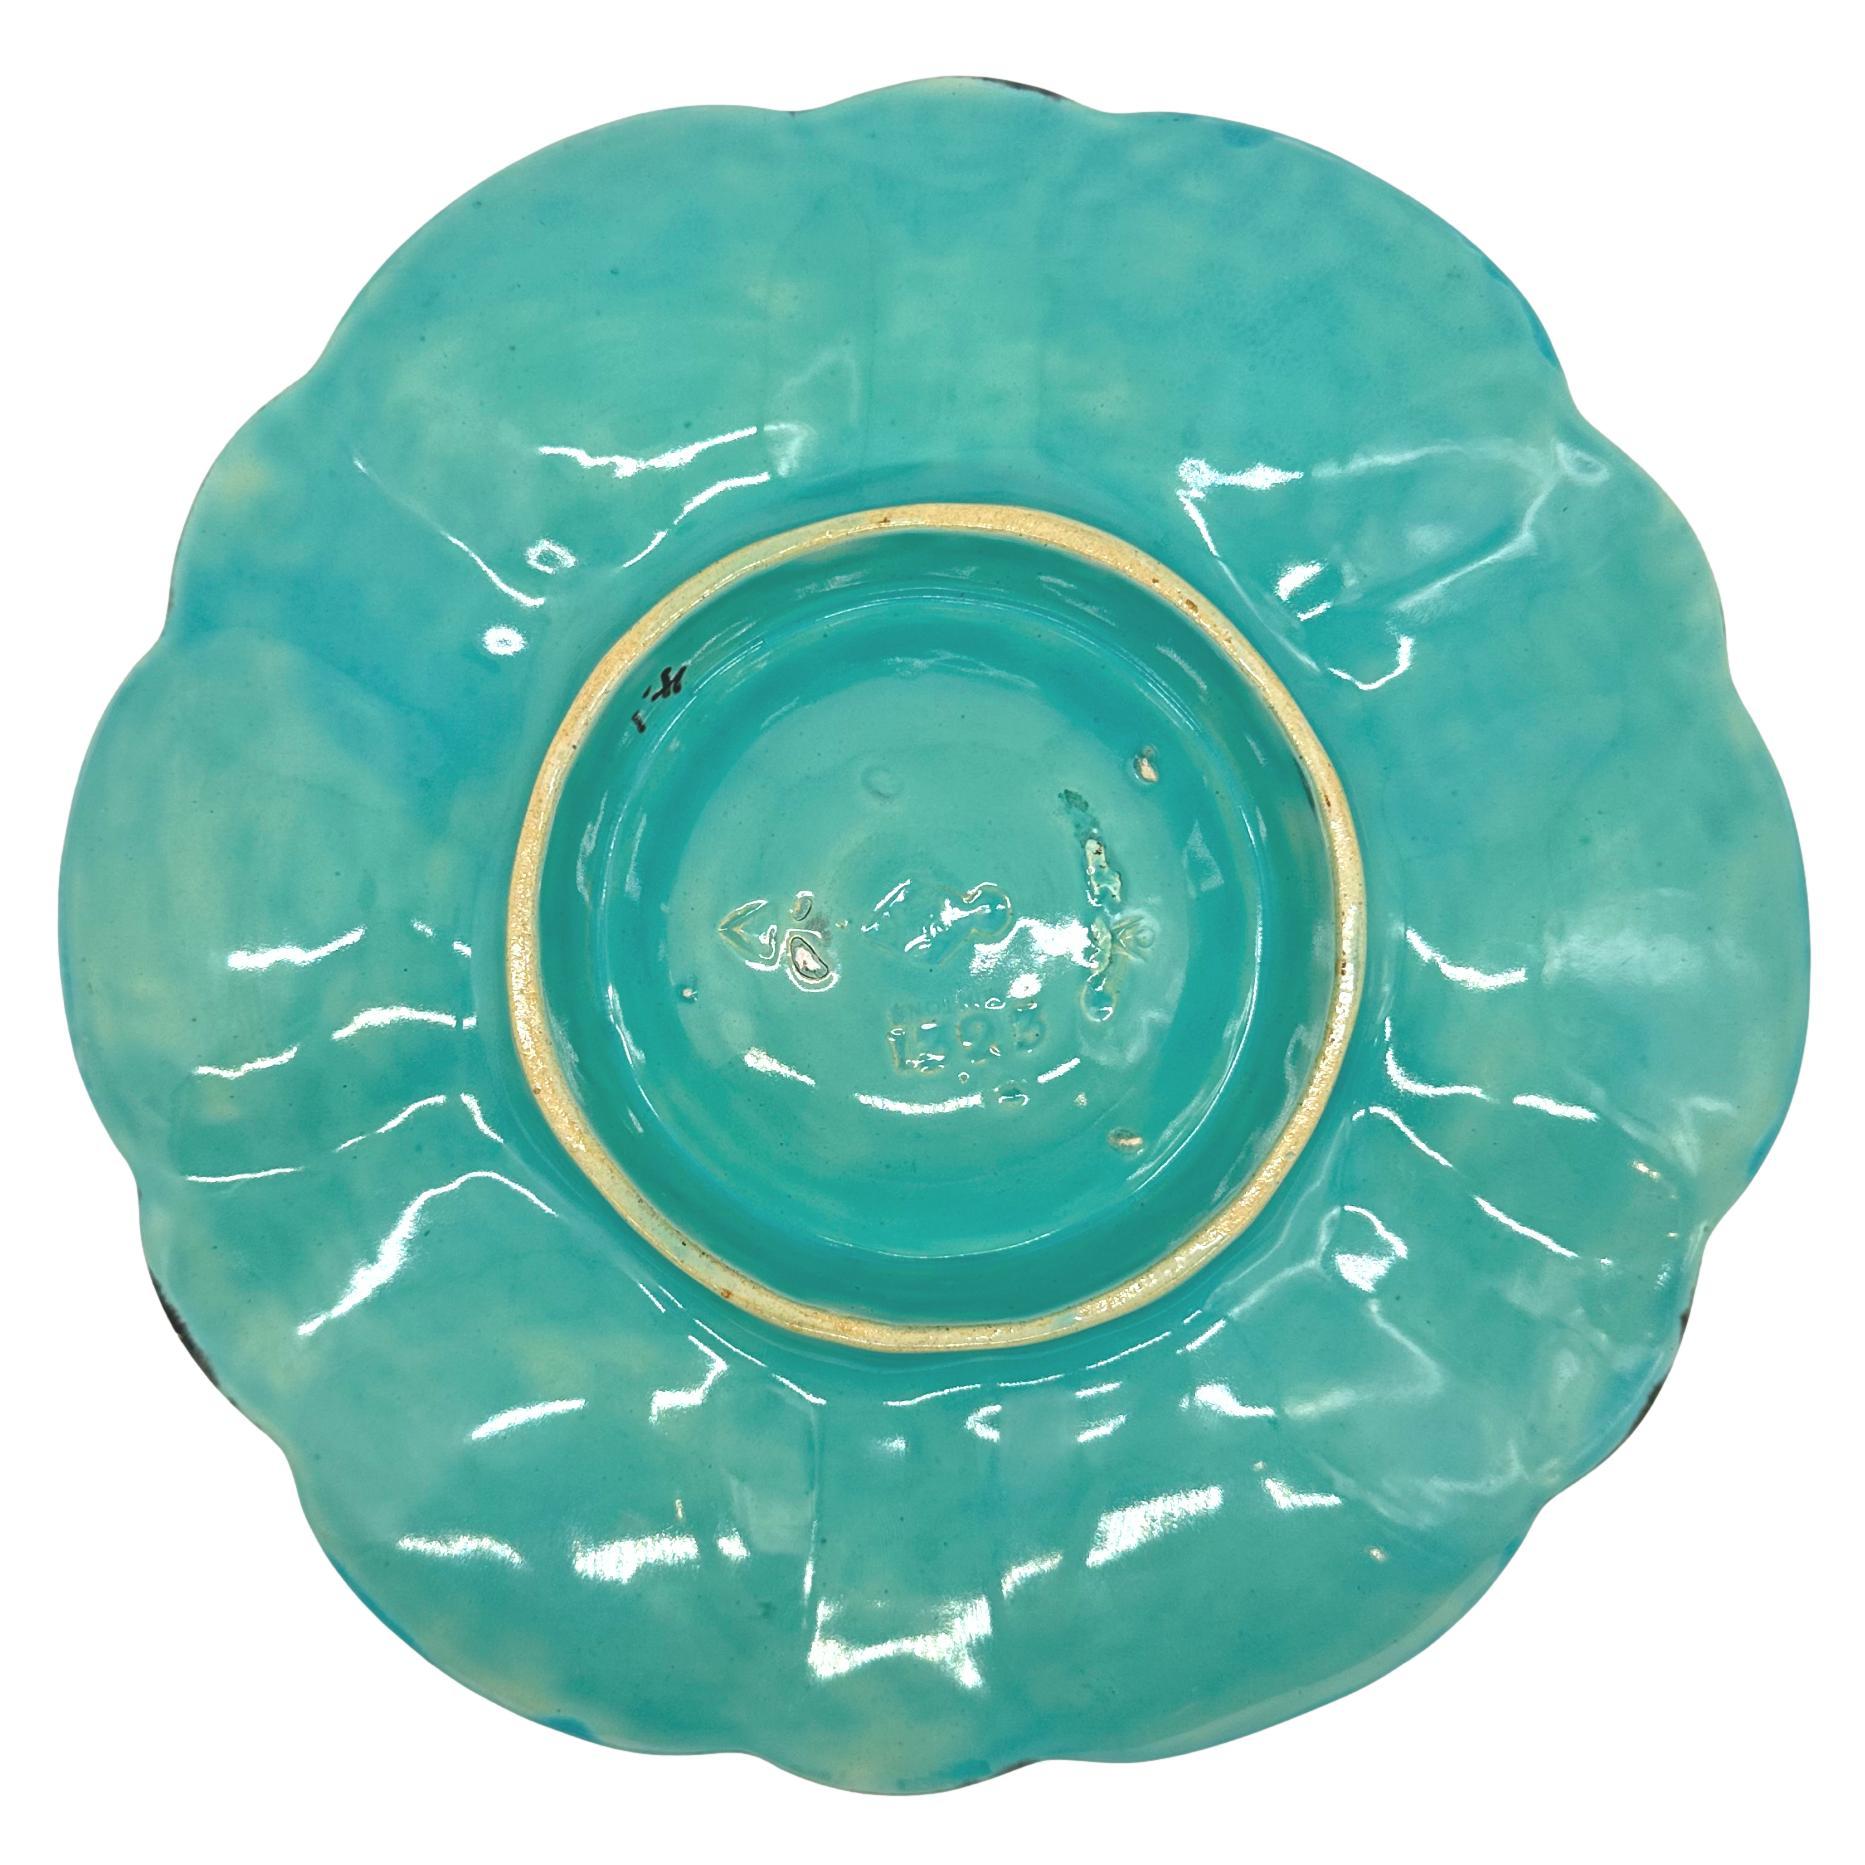 Molded Minton Majolica Turquoise-Ground Oyster Plate, Shells and Seaweed, Dated 1878